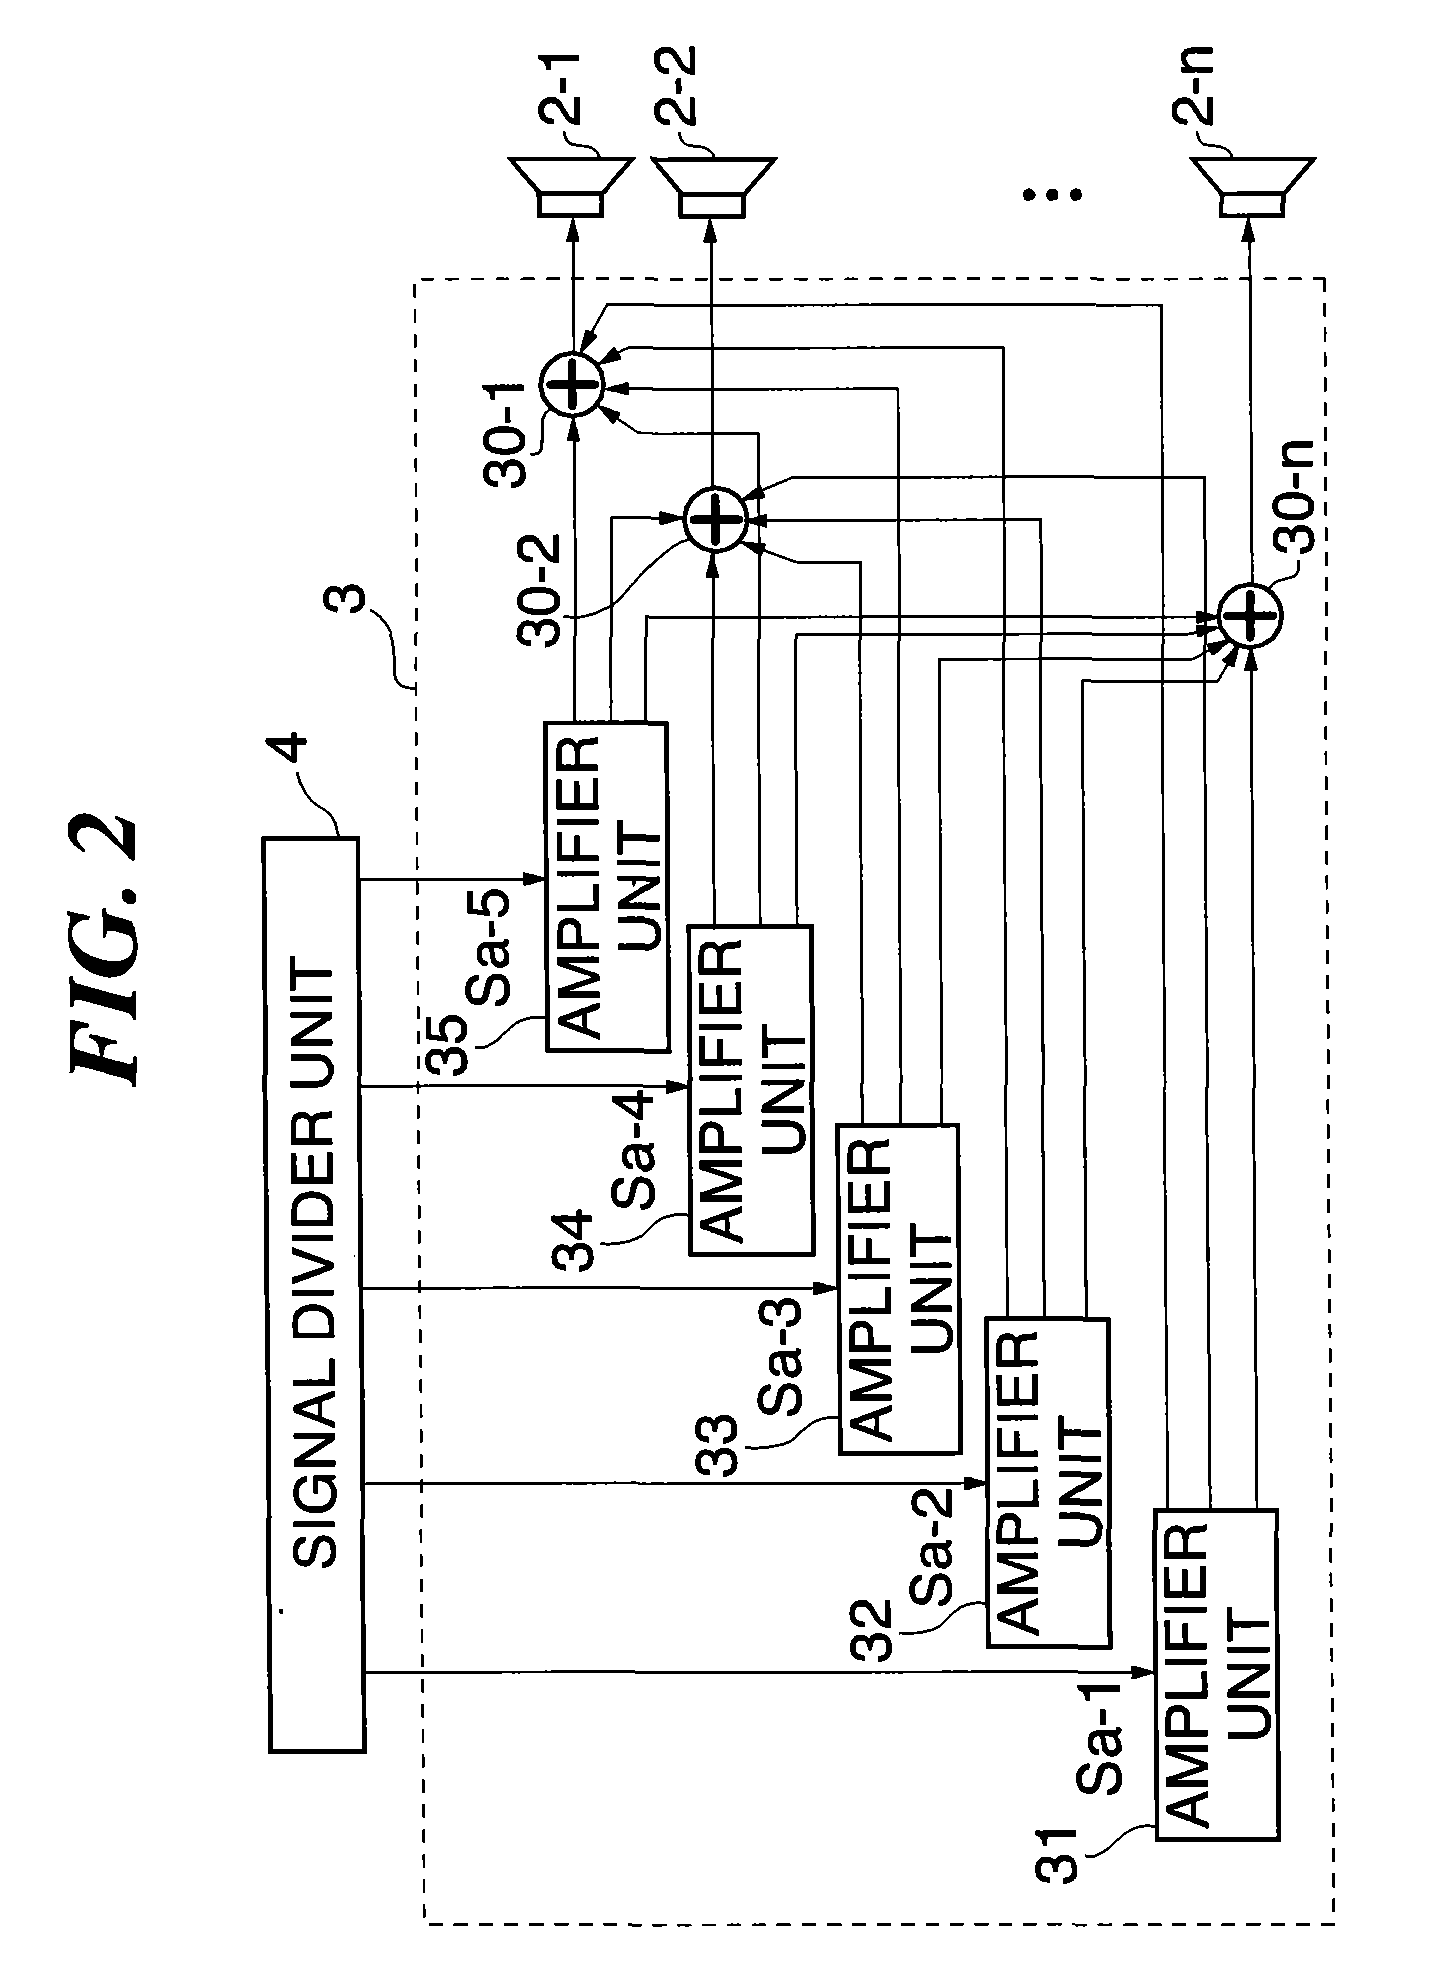 Speaker array apparatus, microphone array apparatus, and signal processing methods therefor